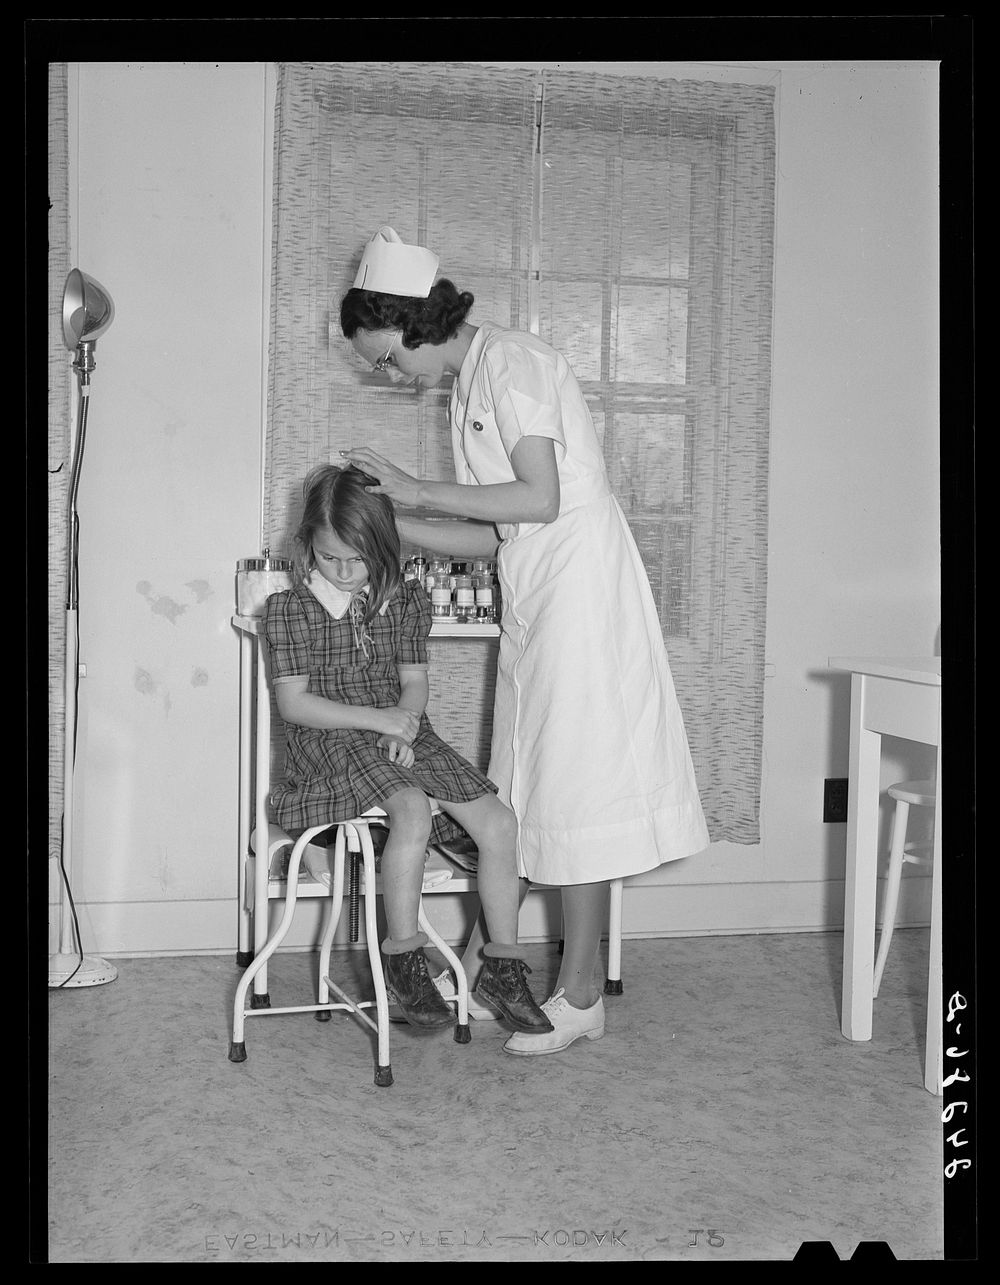 Child being treated in health clinic. Shafter migrant camp. Shafter, California. Sourced from the Library of Congress.